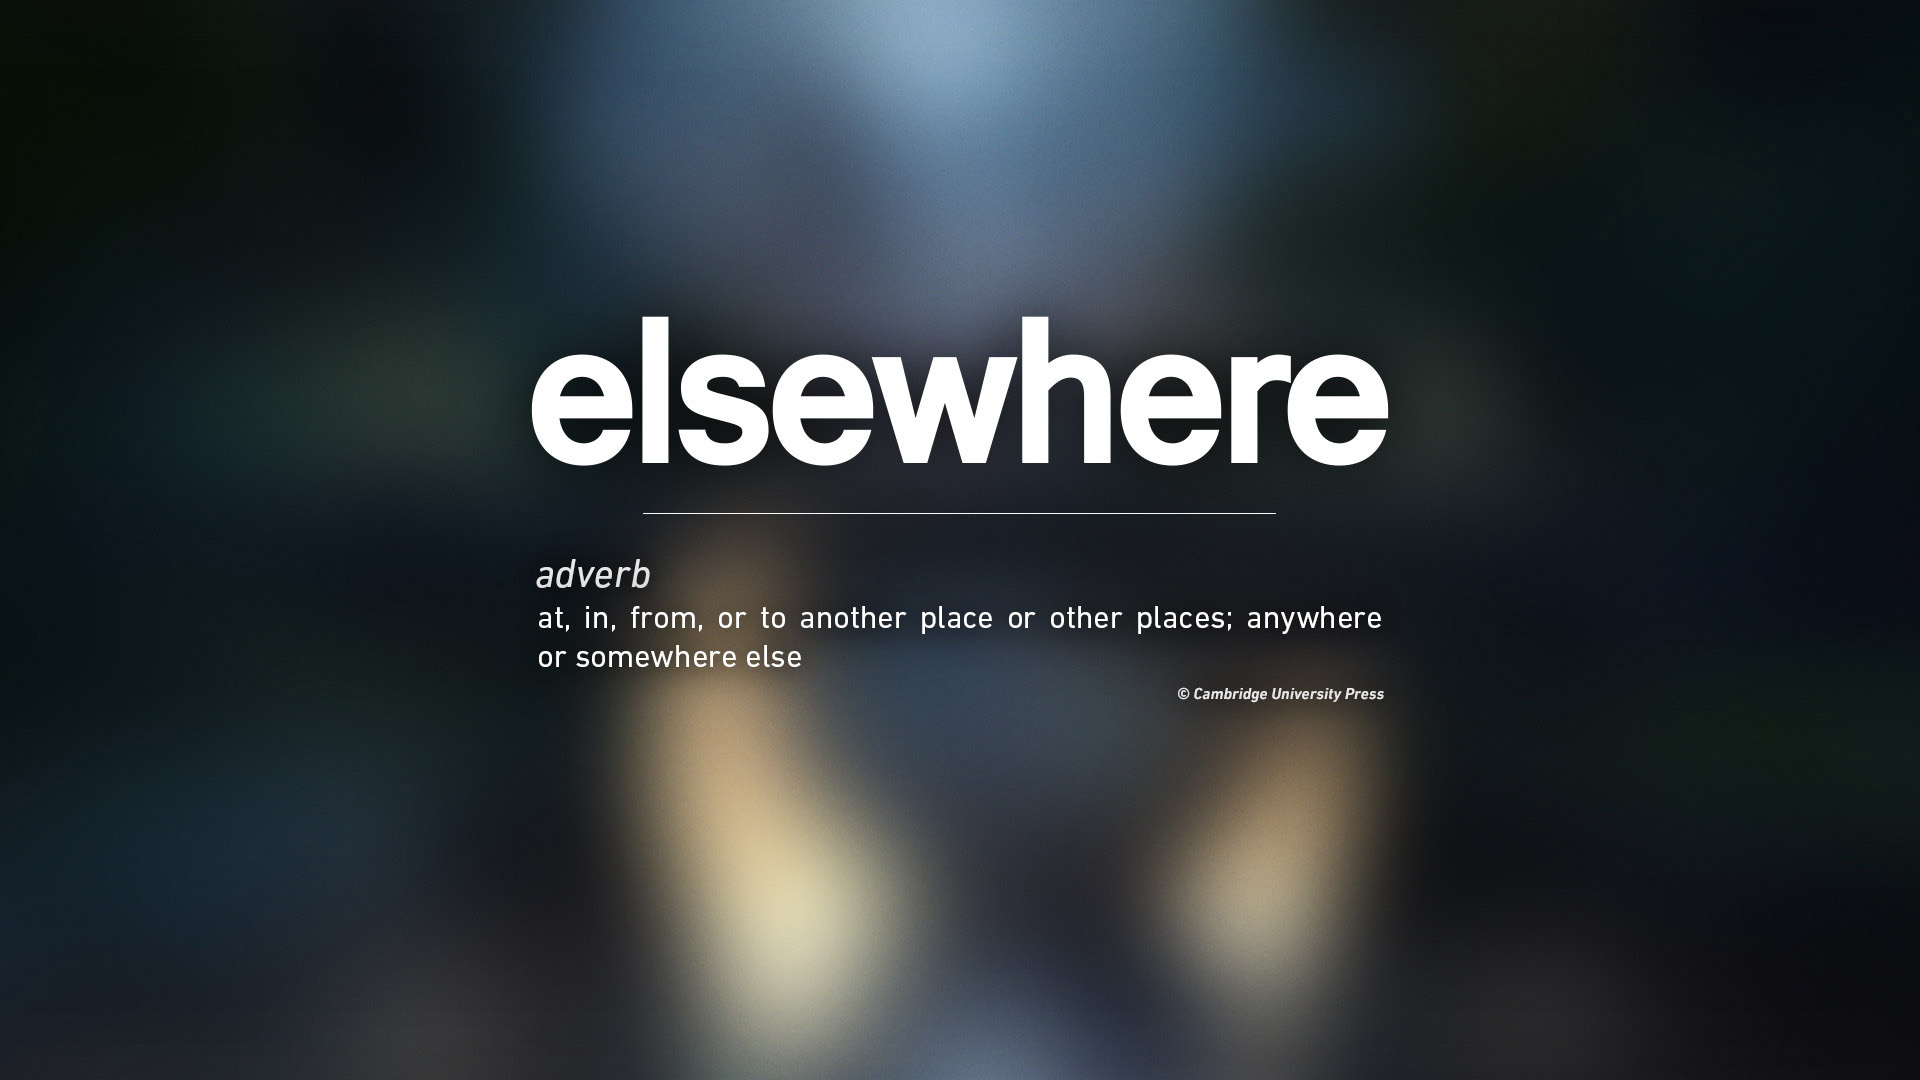 Elsewhere Entertainment announcement image - a stylized definition of the word 